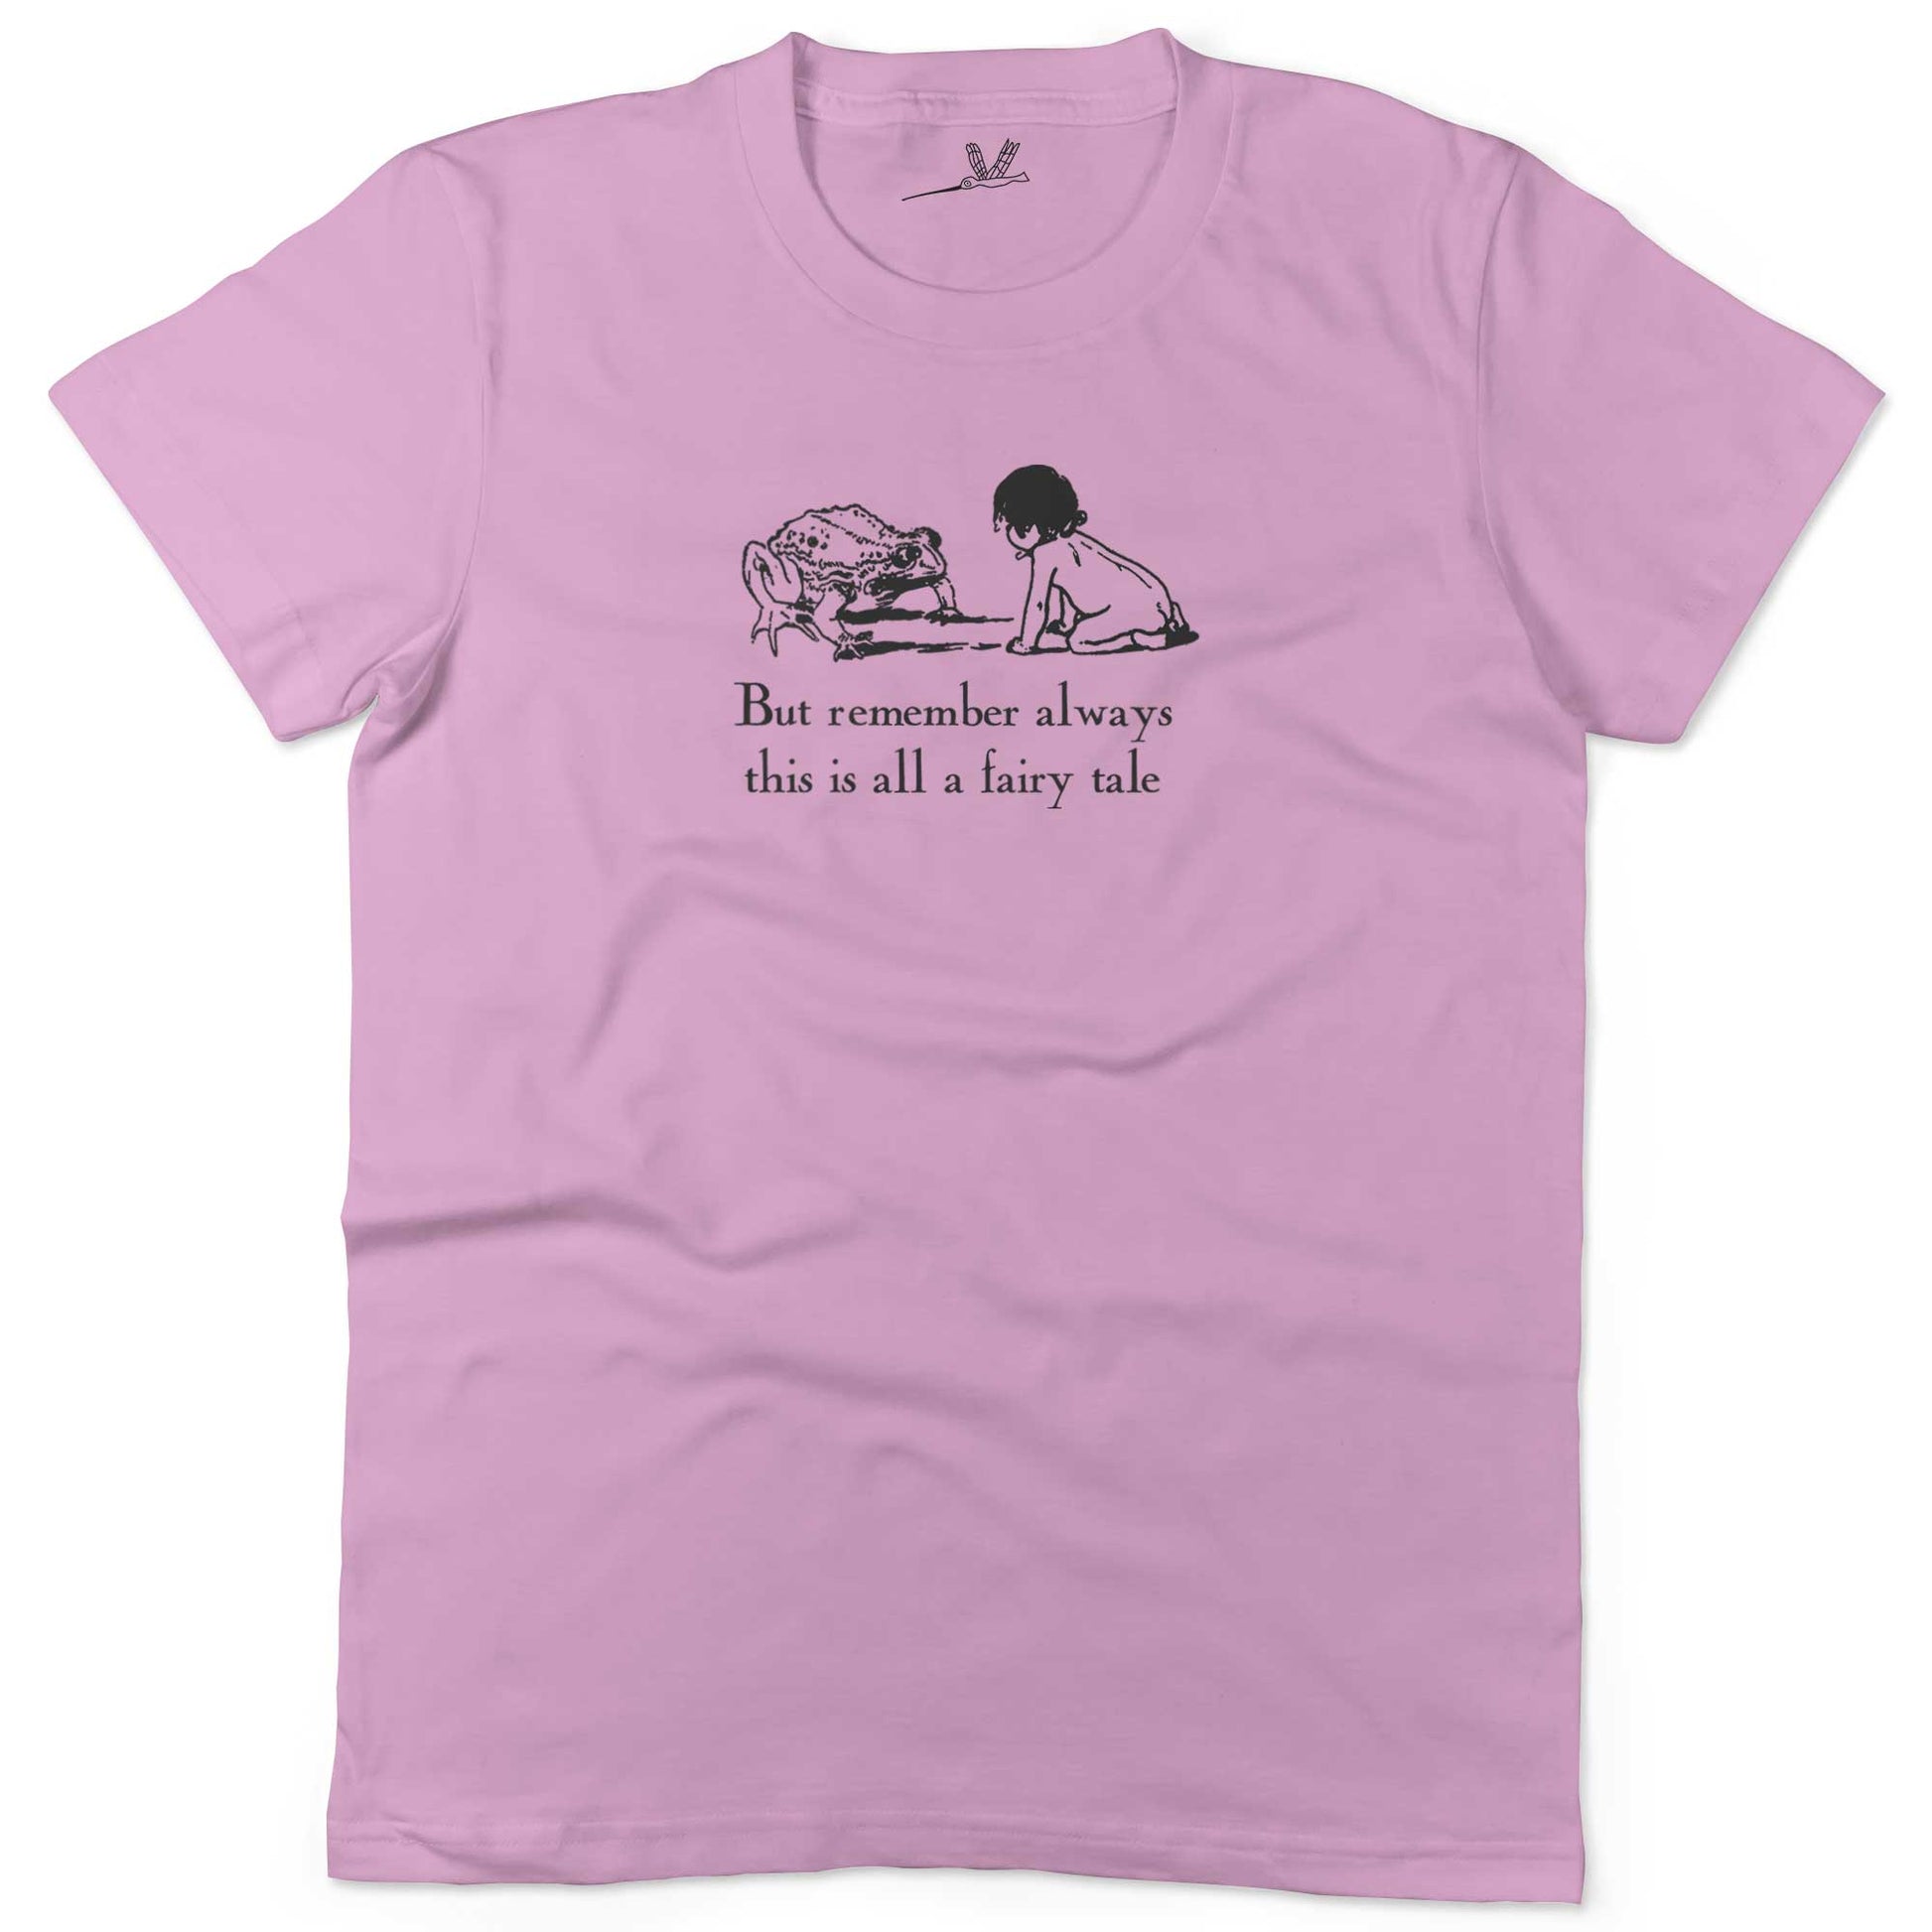 But remember always this is all a fairy tale Unisex Or Women's Cotton T-shirt-Pink-Woman